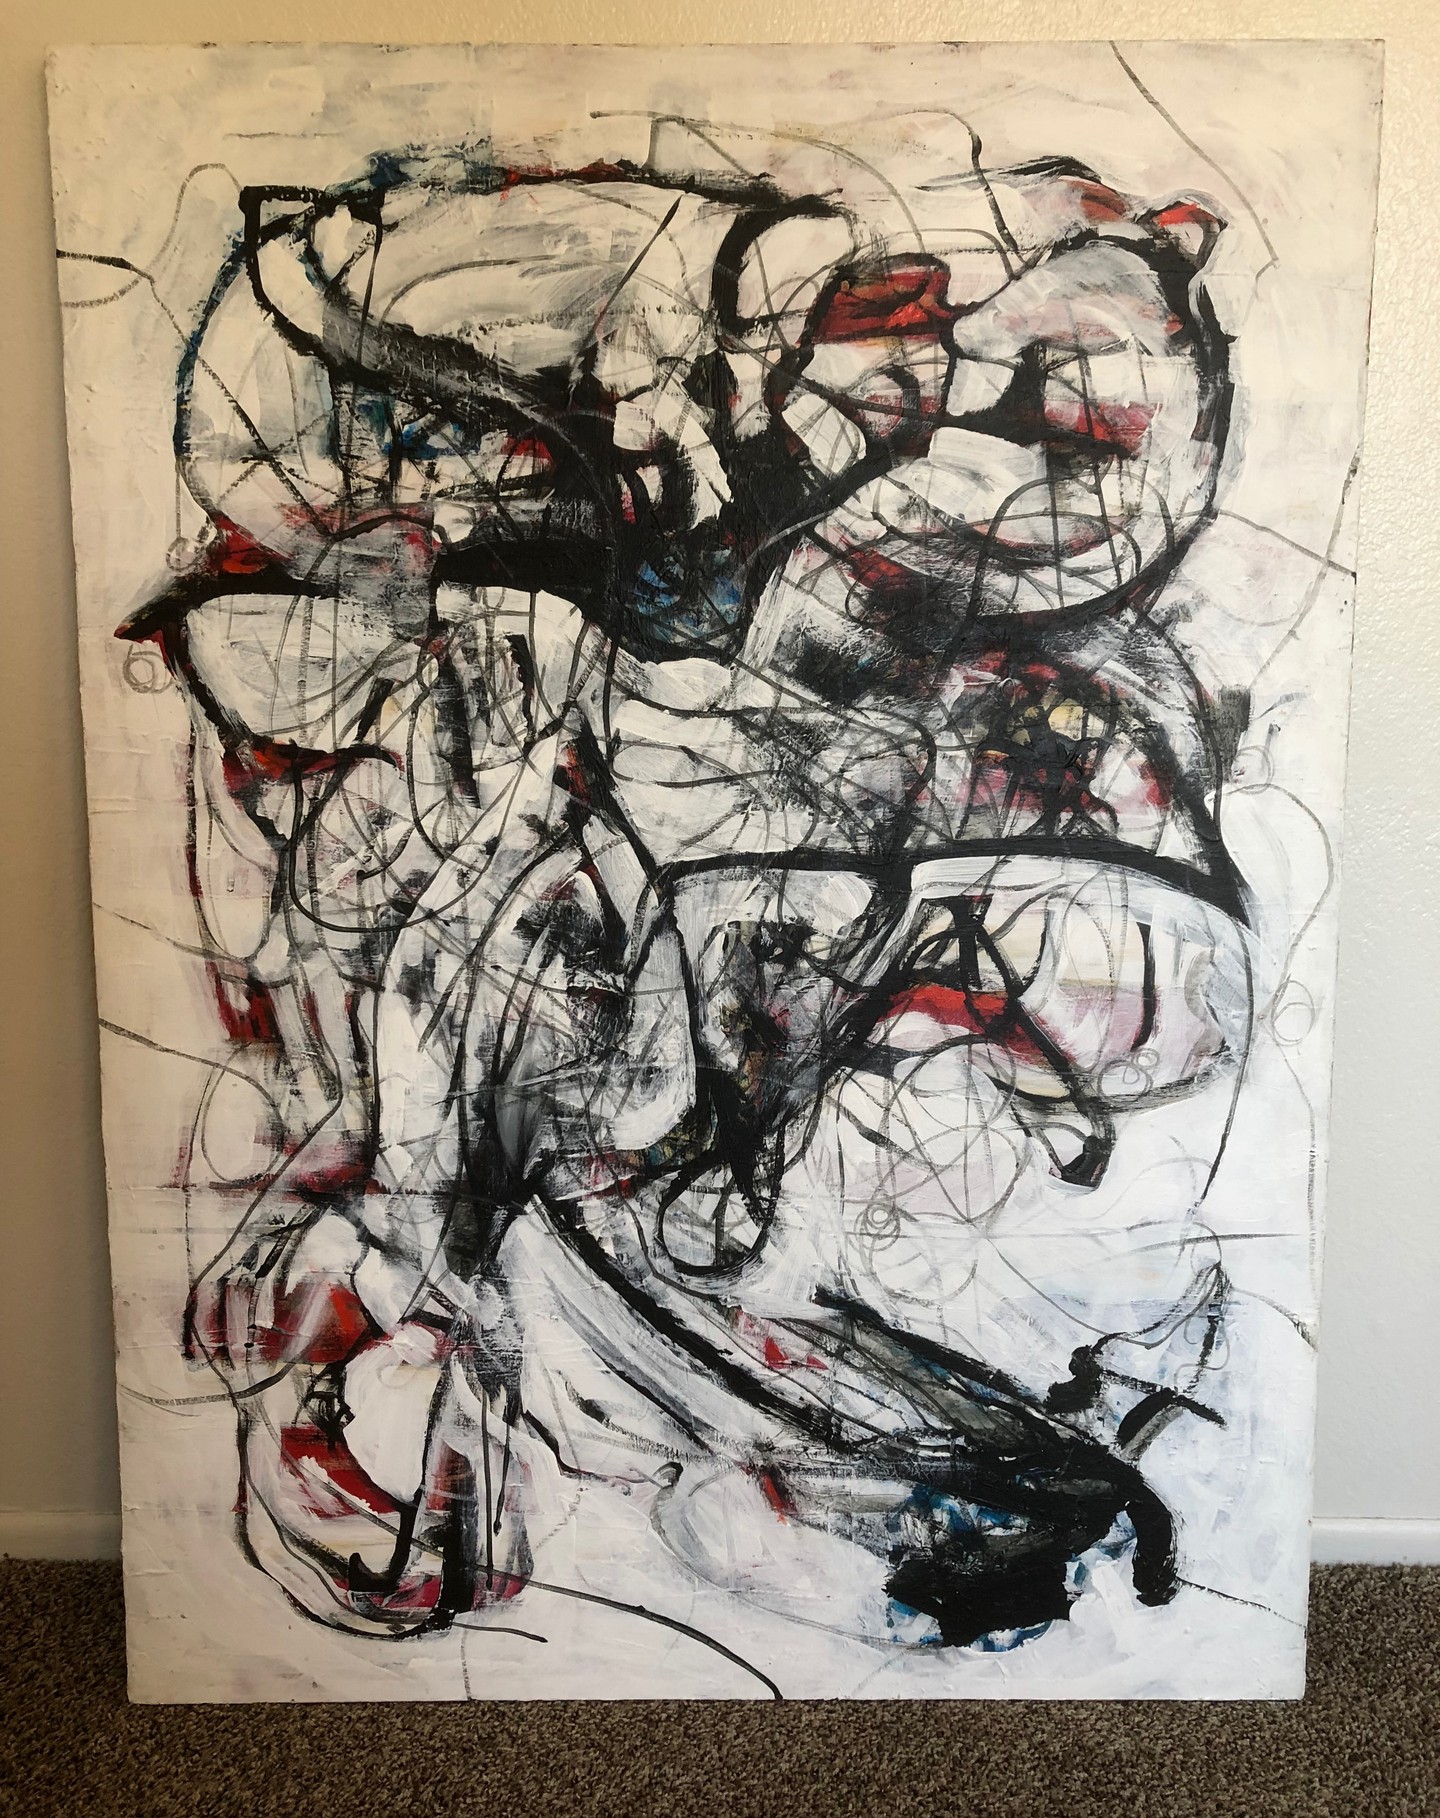 Black and white and red abstract painting